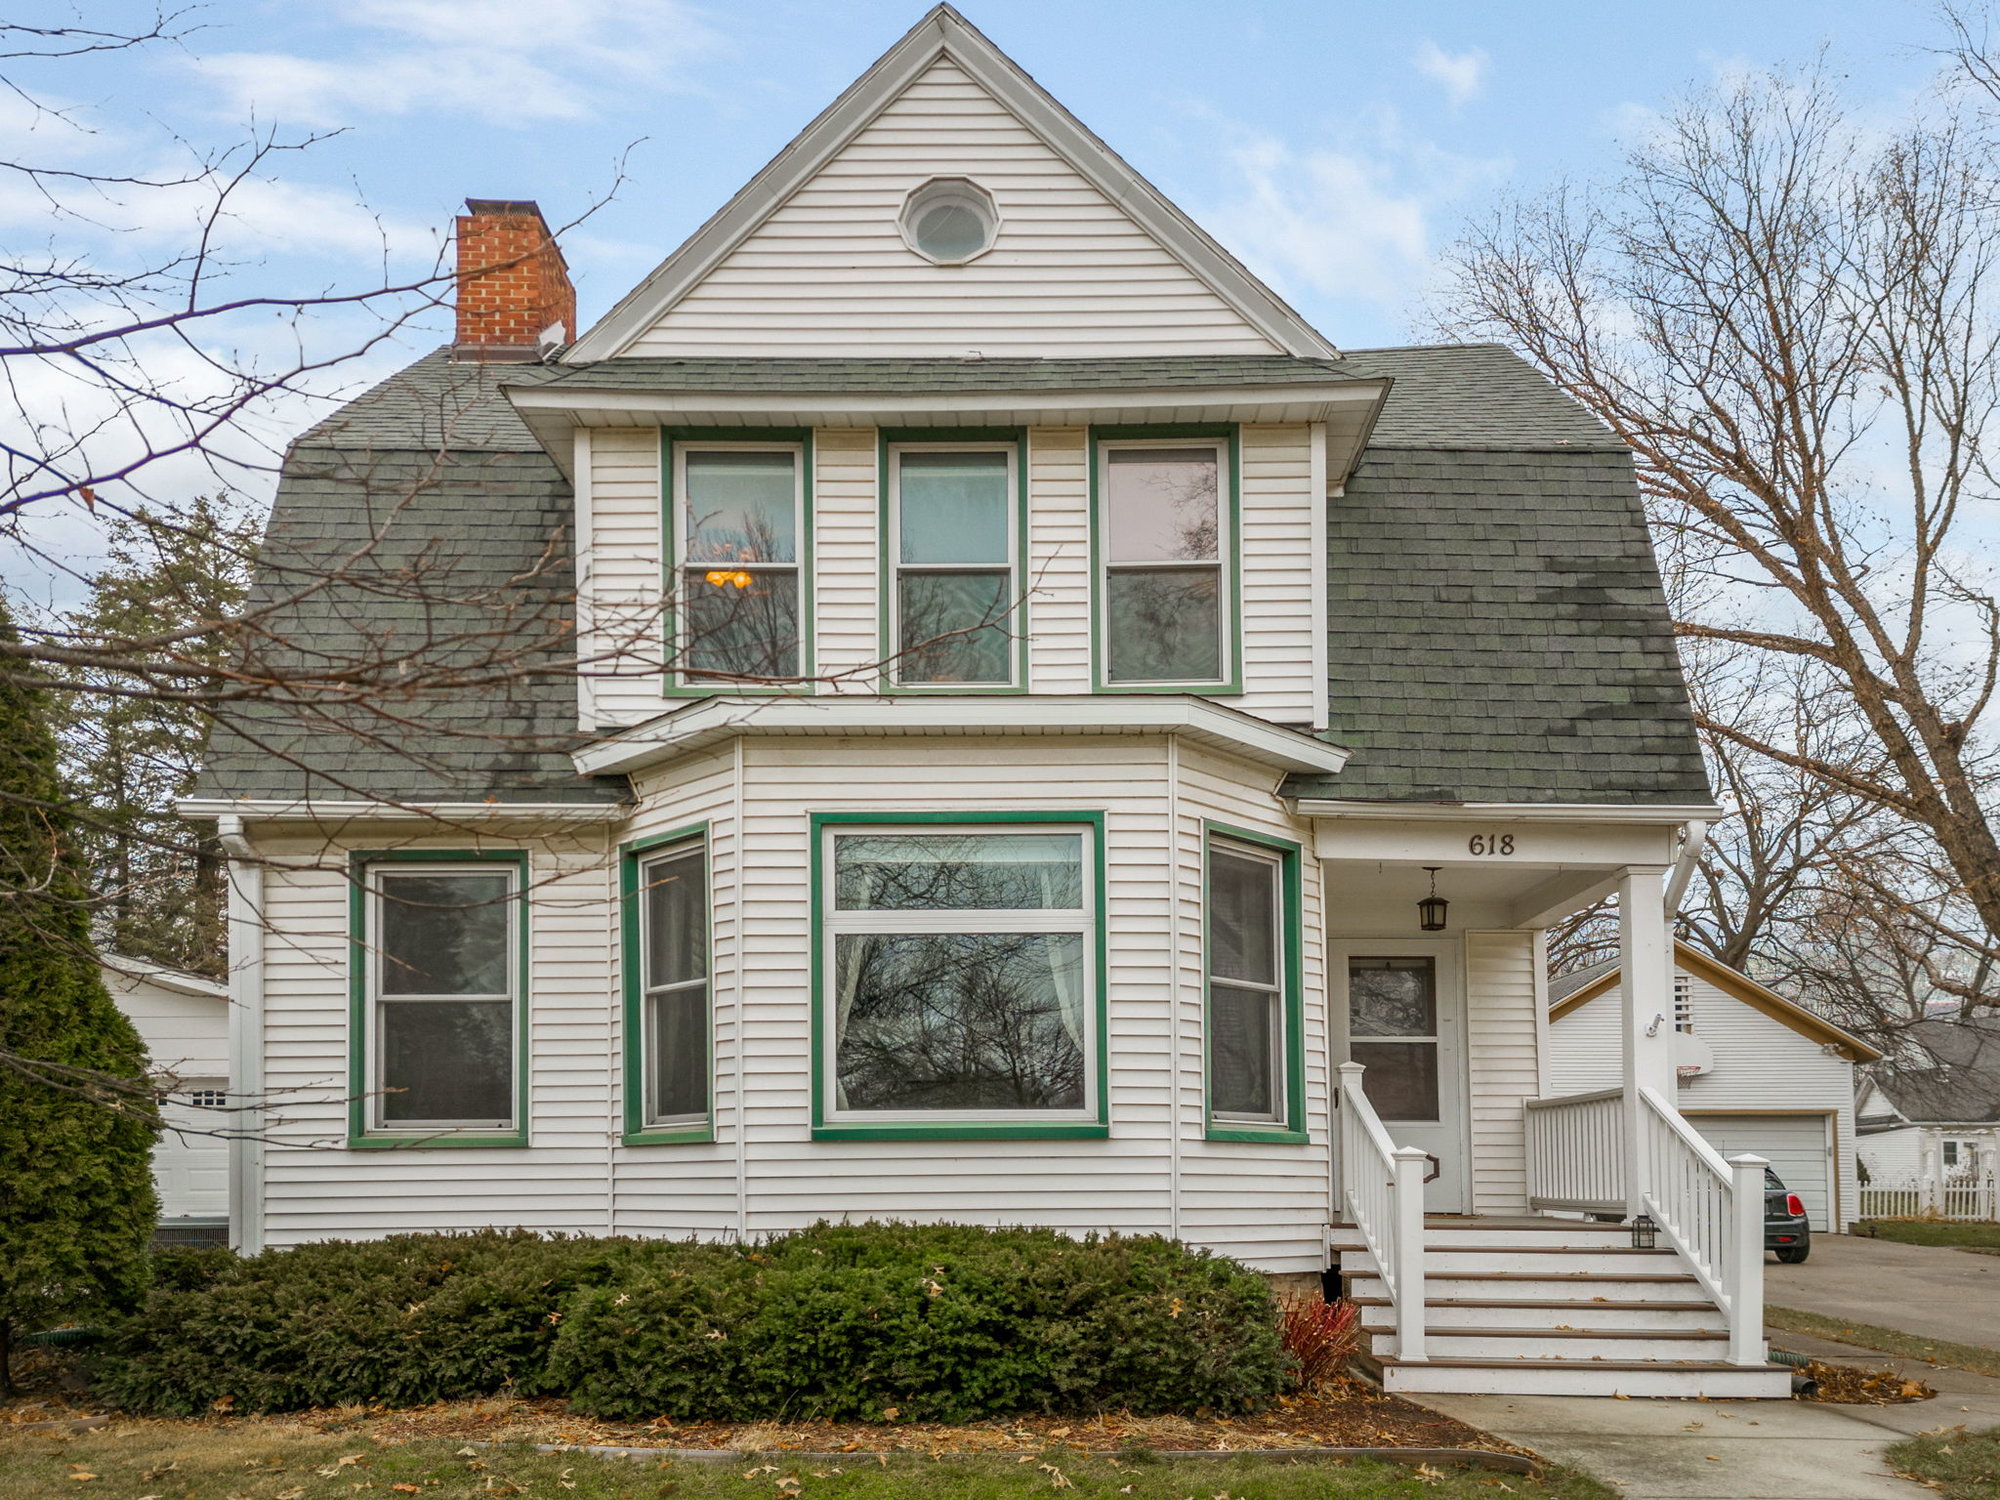 The 1900's Historic Home in Waverly that is Filled with Character and Charm